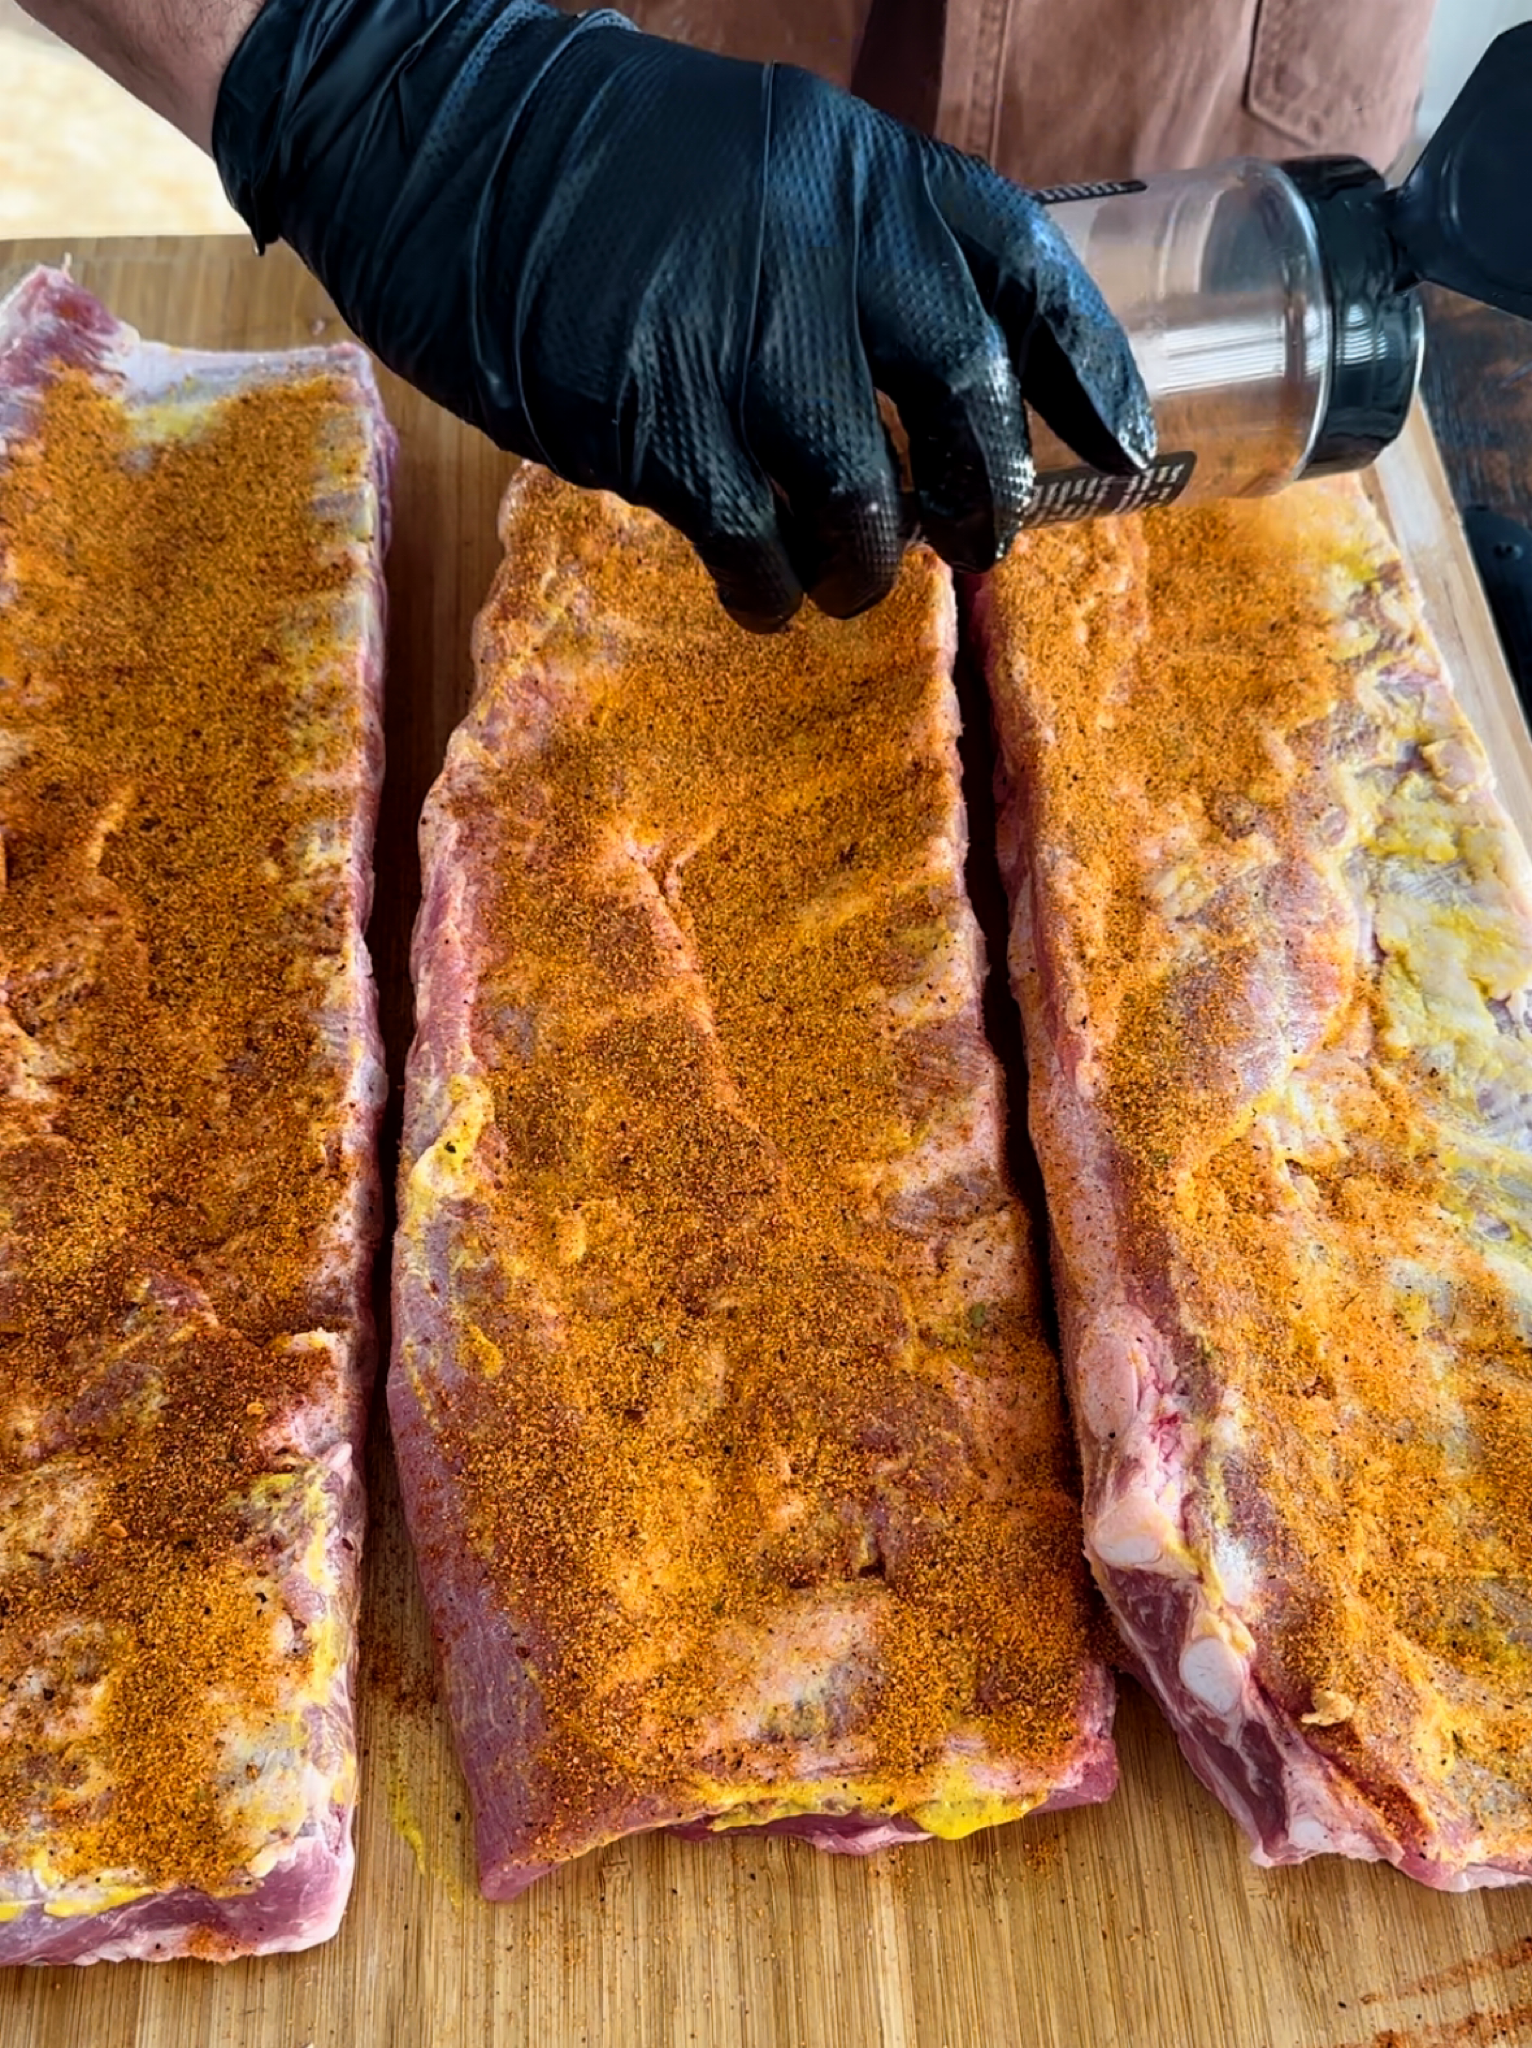 St. Louis style ribs being prepped with mustard and seasoning. 